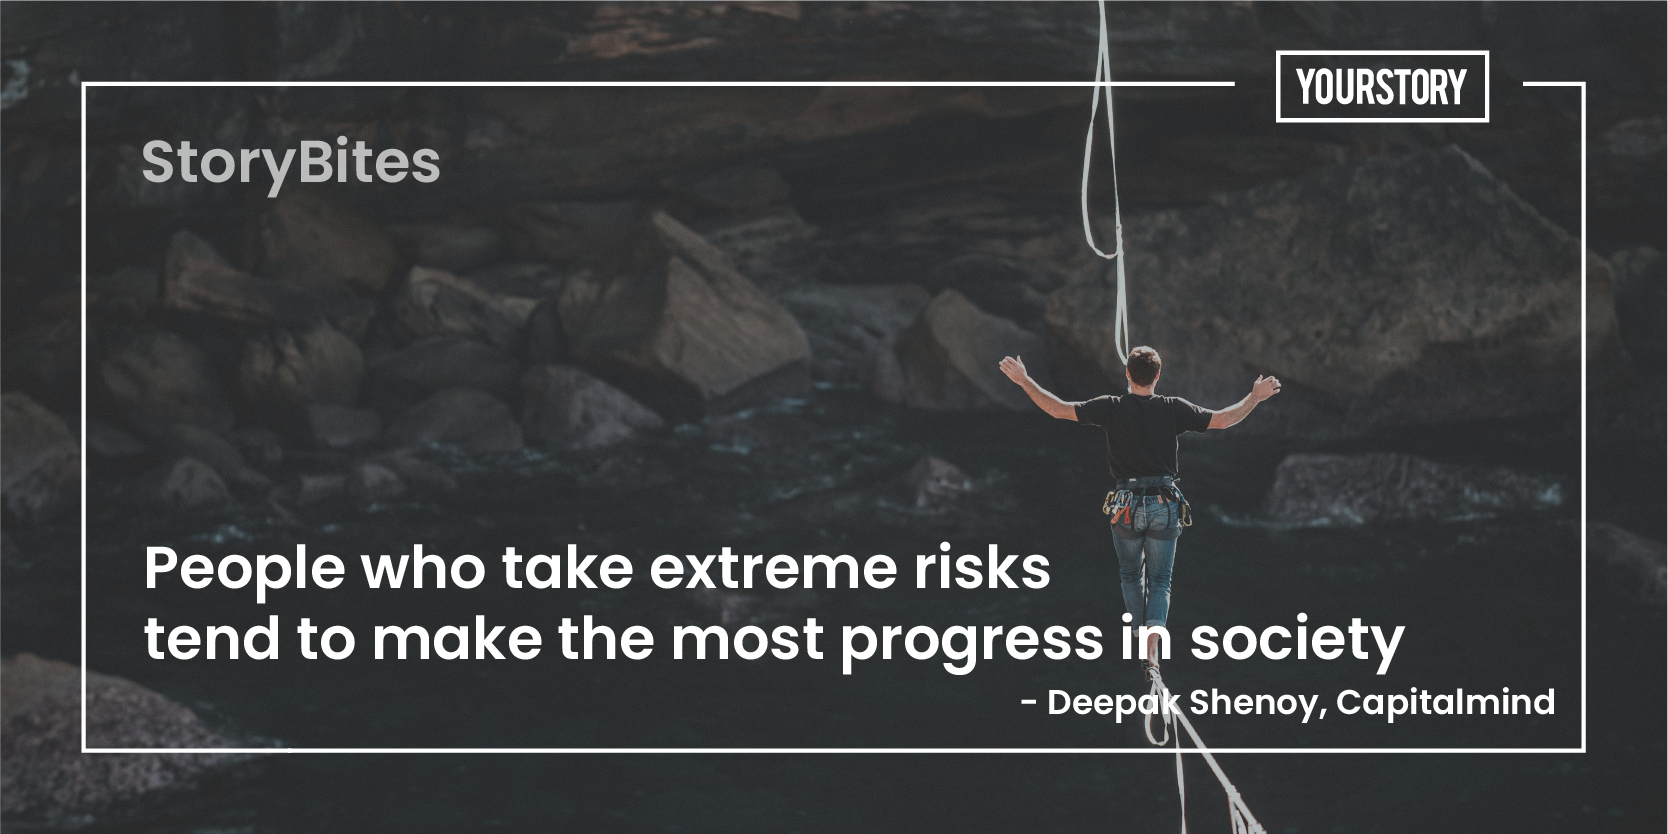 ‘People who take extreme risks tend to make the most progress in society’ – 20 quotes of the week on entrepreneurship and leadership